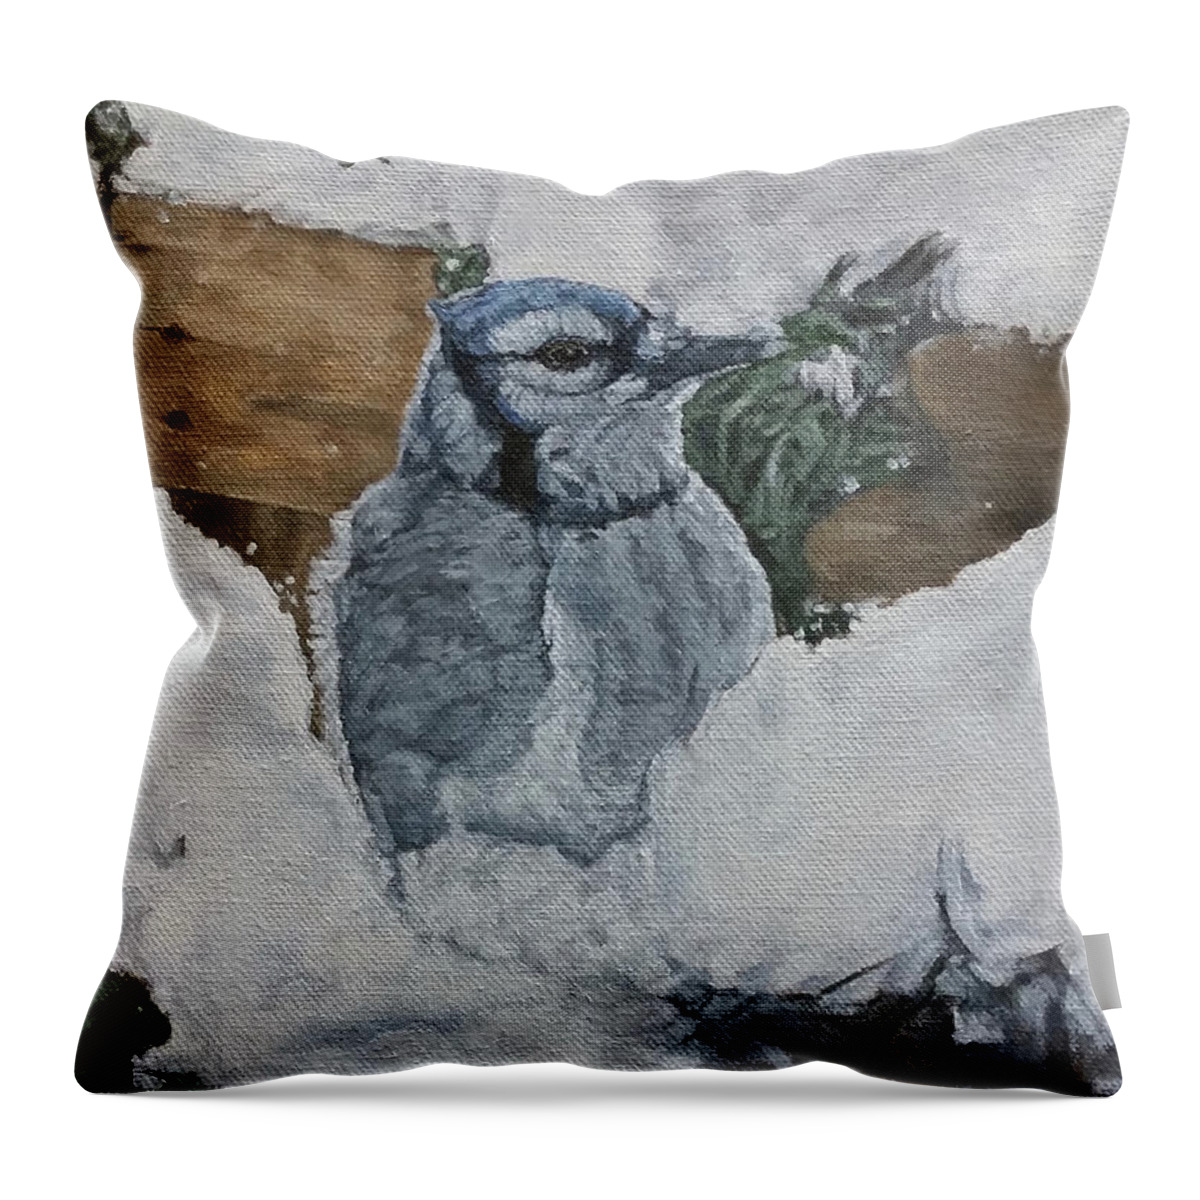 Blue Jay Throw Pillow featuring the painting Winters Greeting by Wendy Shoults